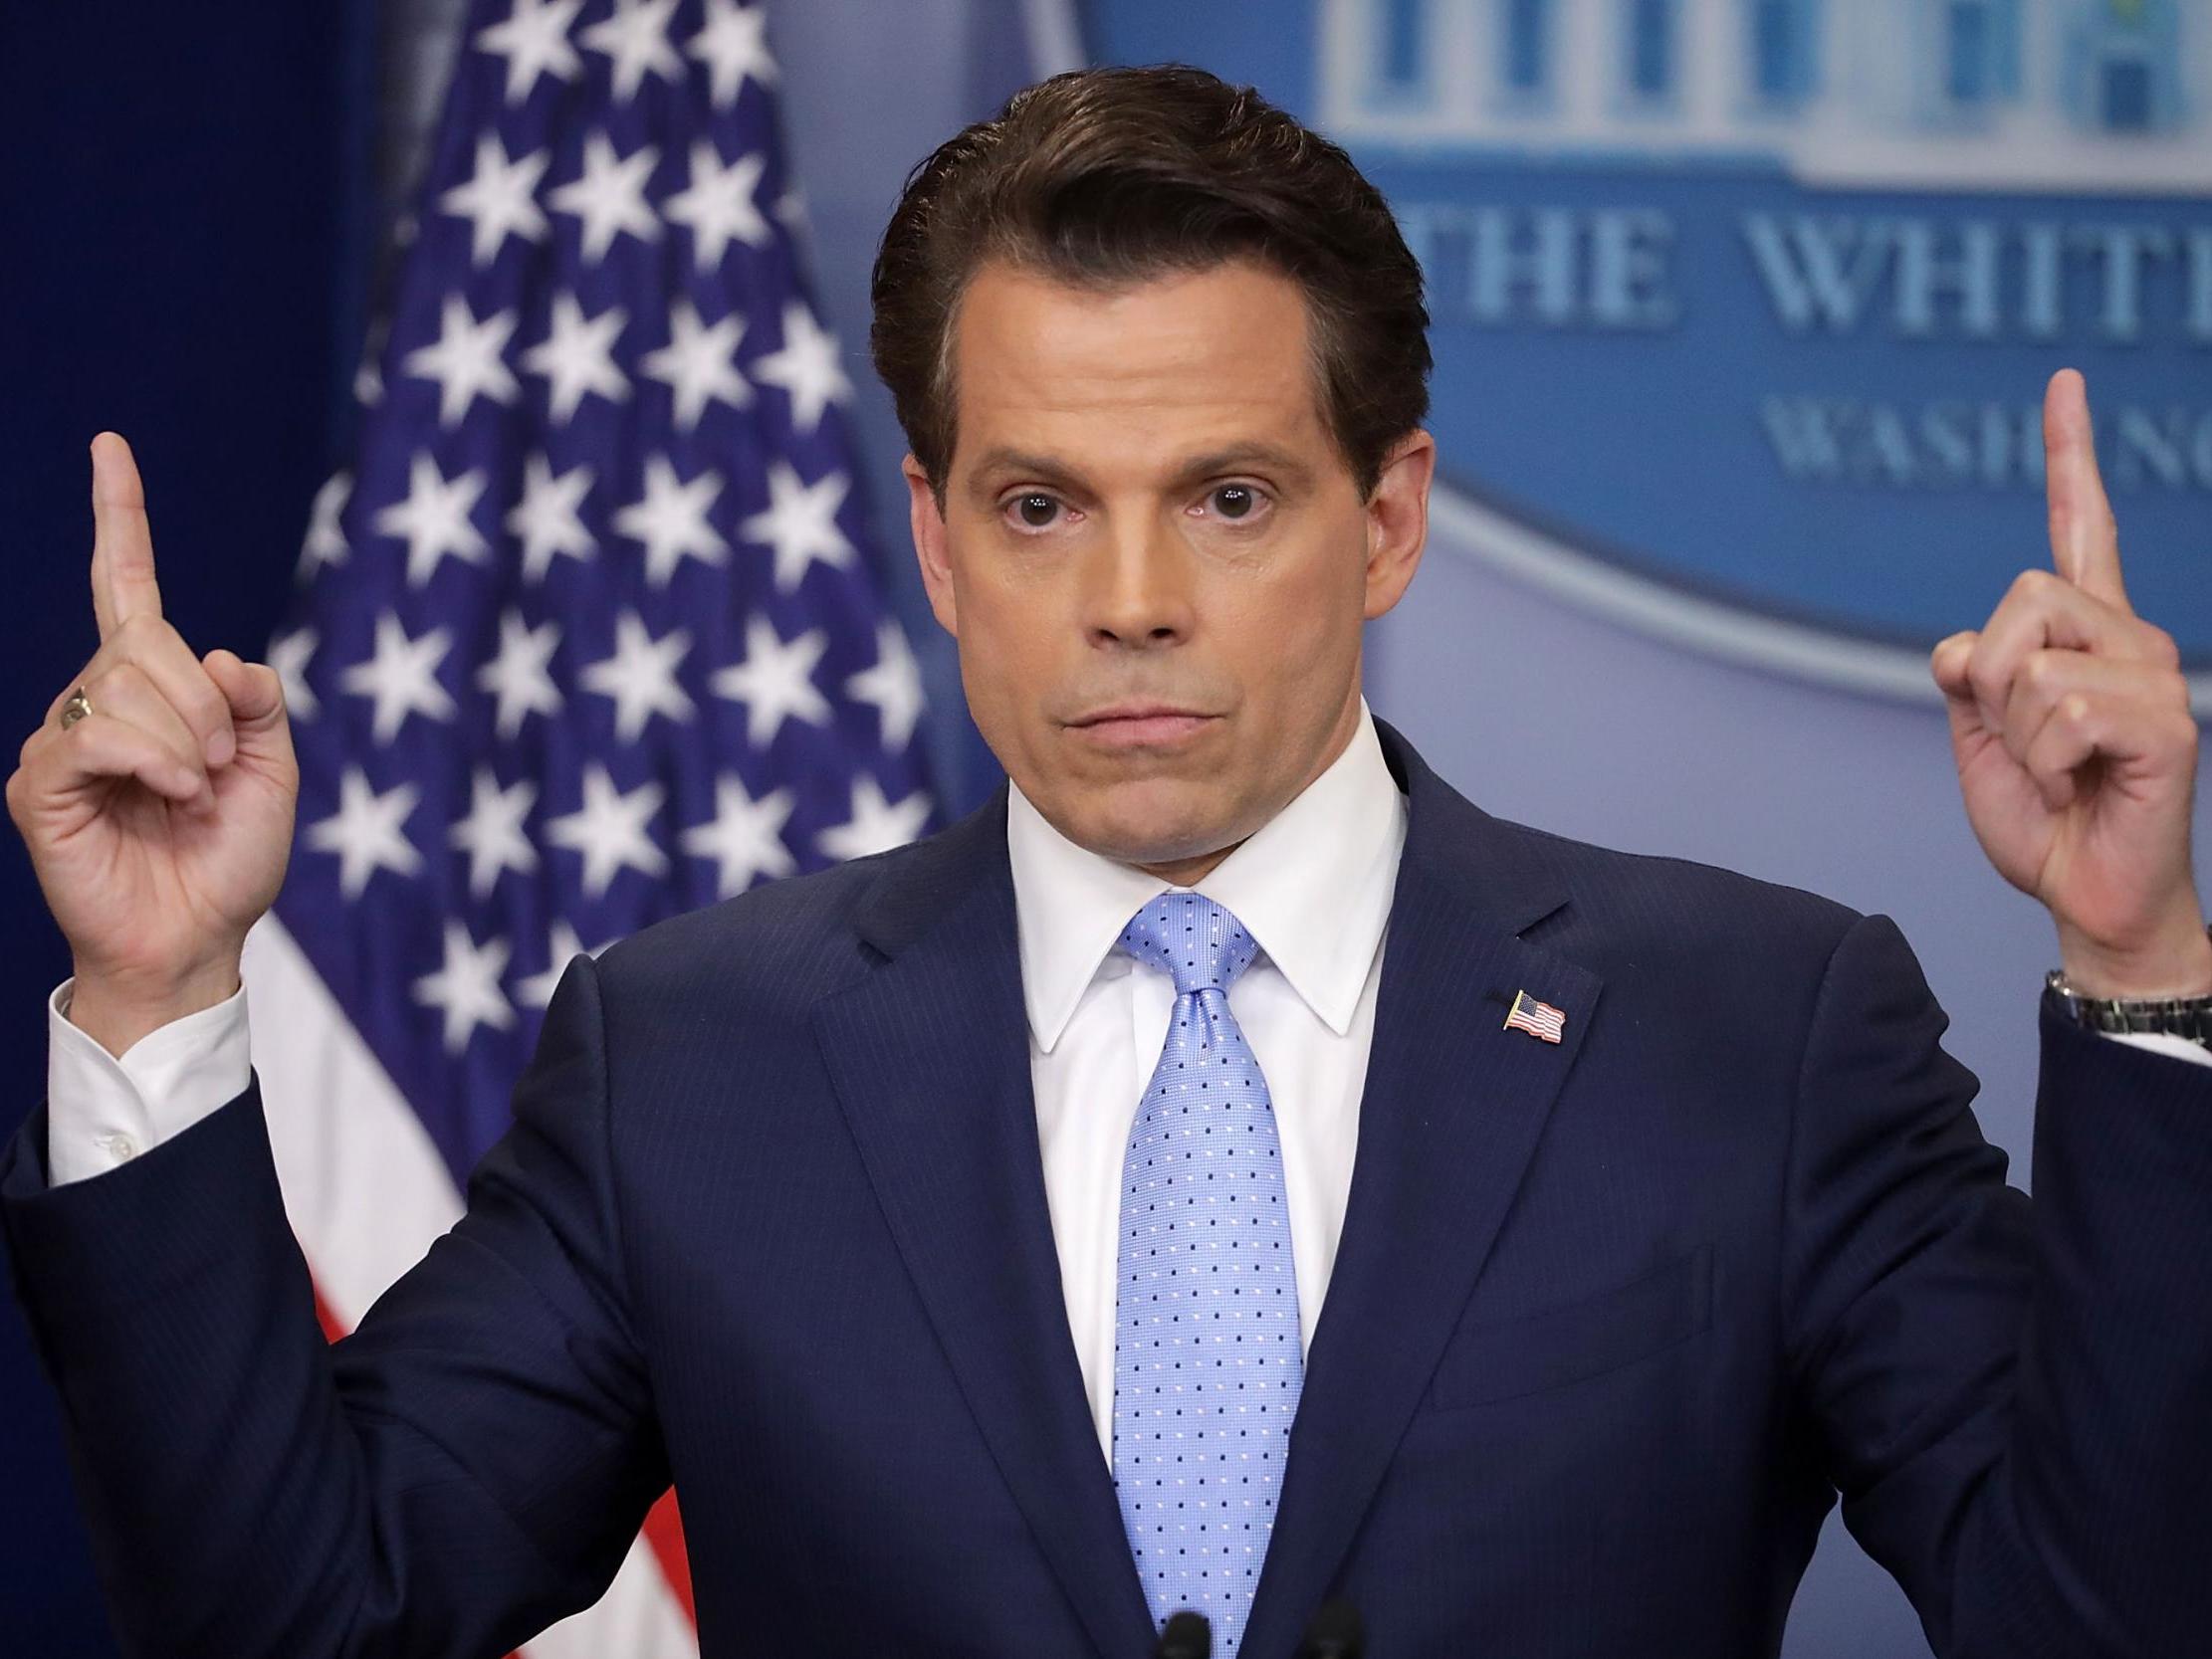 Scaramucci has been taking full advantage of his 11-day tenure by making the rounds on TV in the last couple of weeks